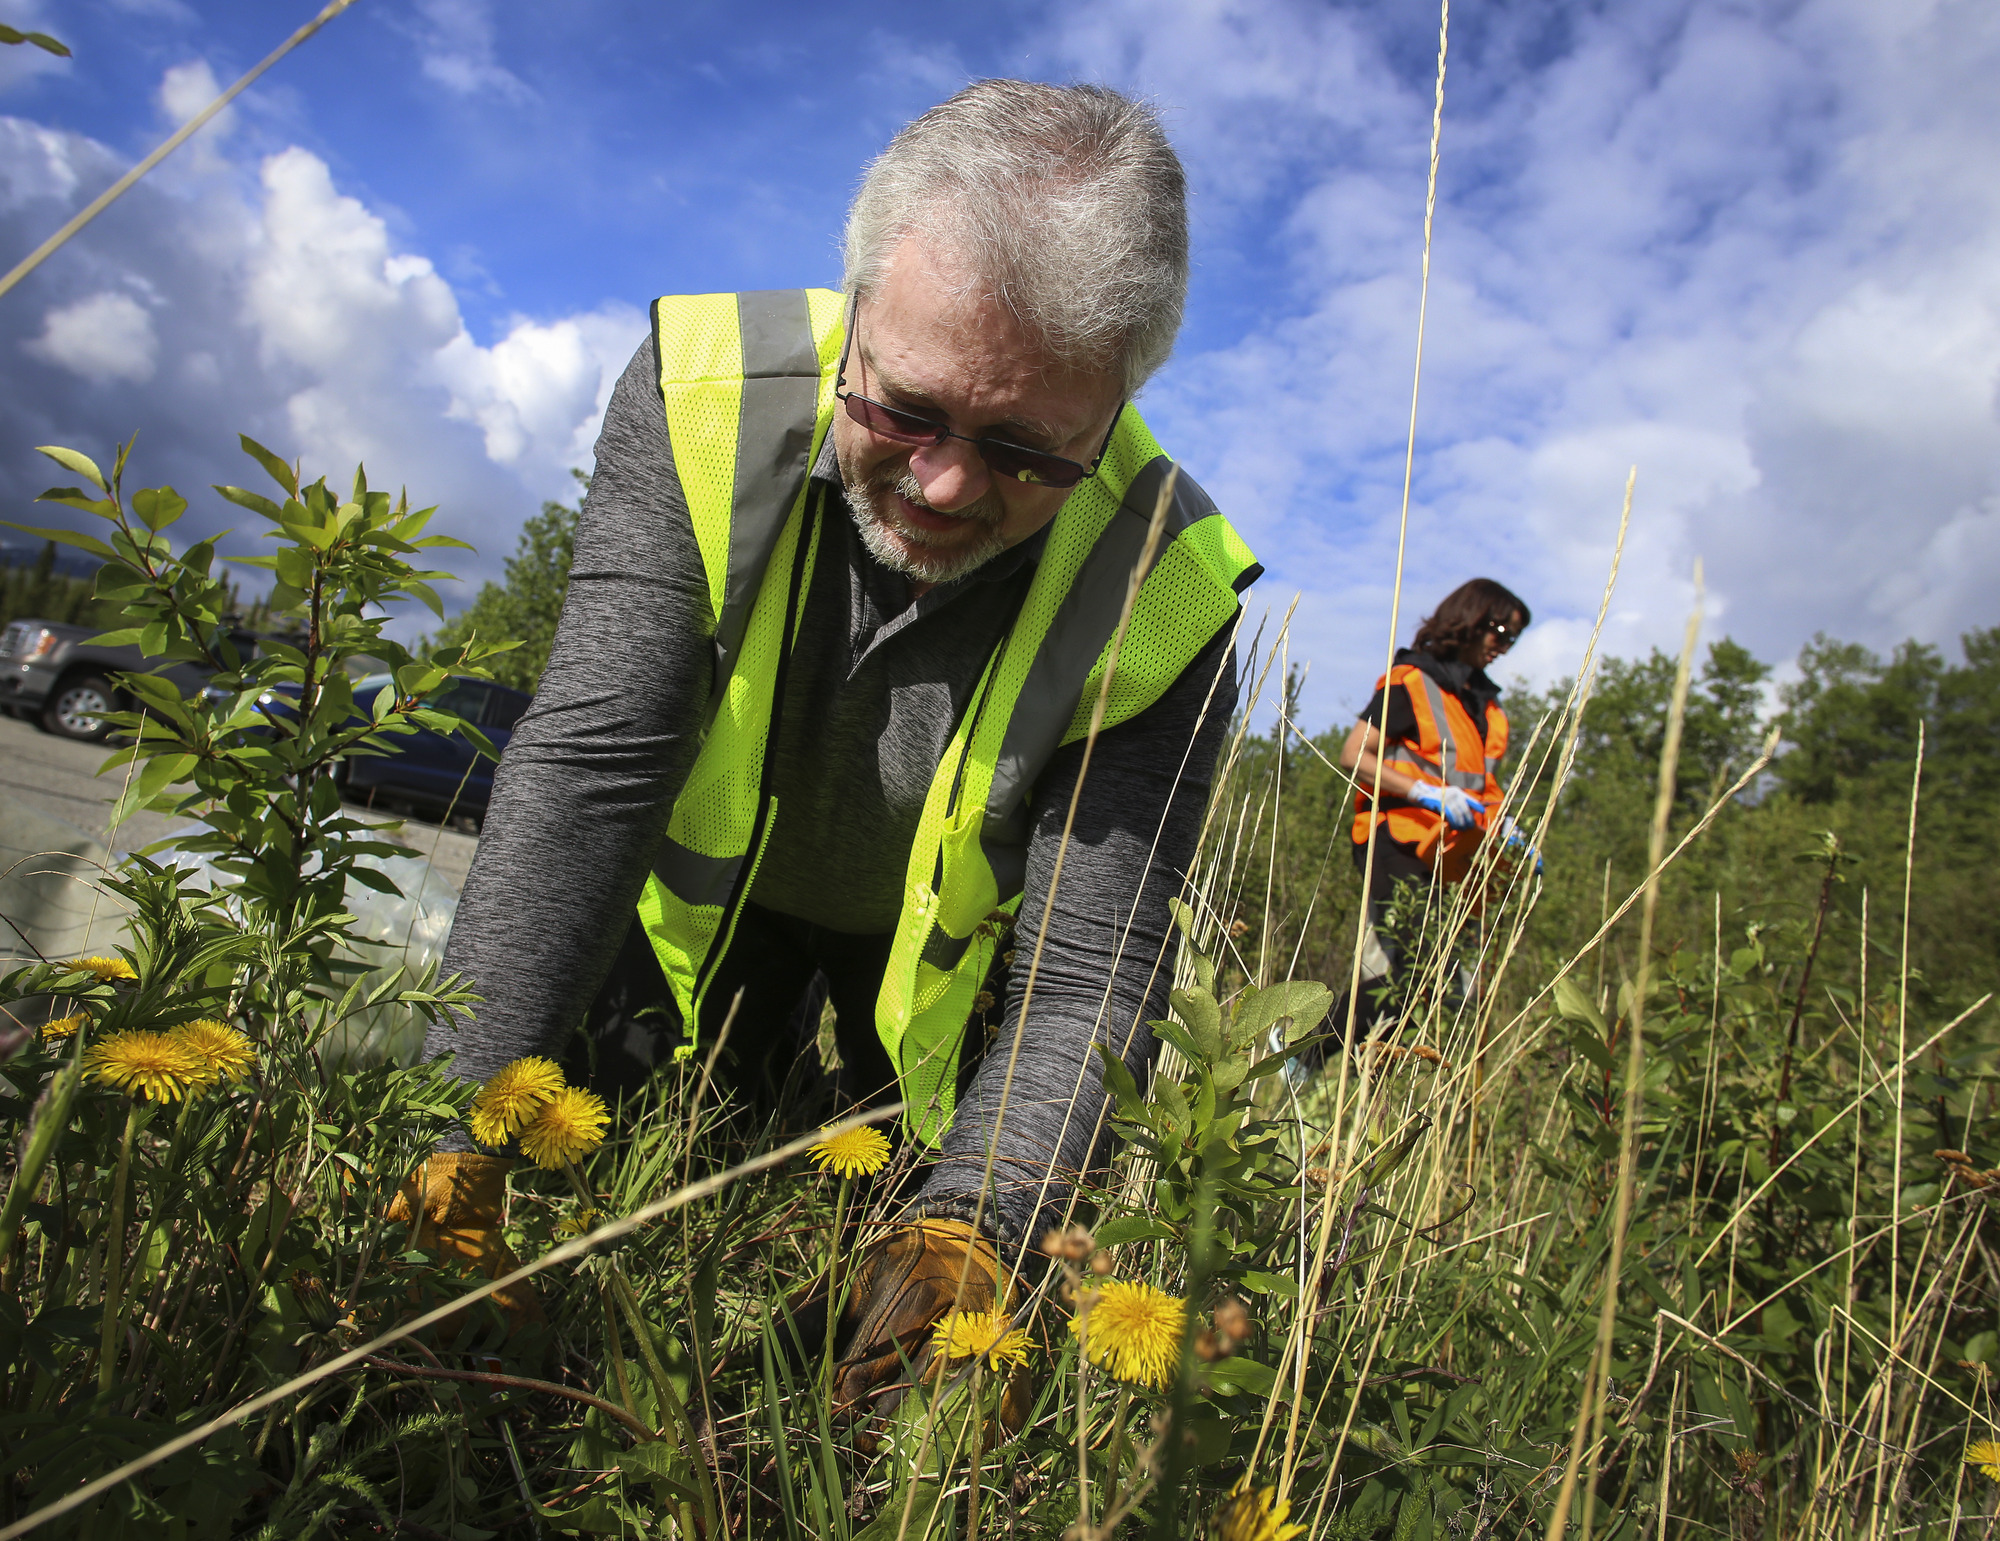 a man in yellow safety vest kneels, pulling up a dandelion